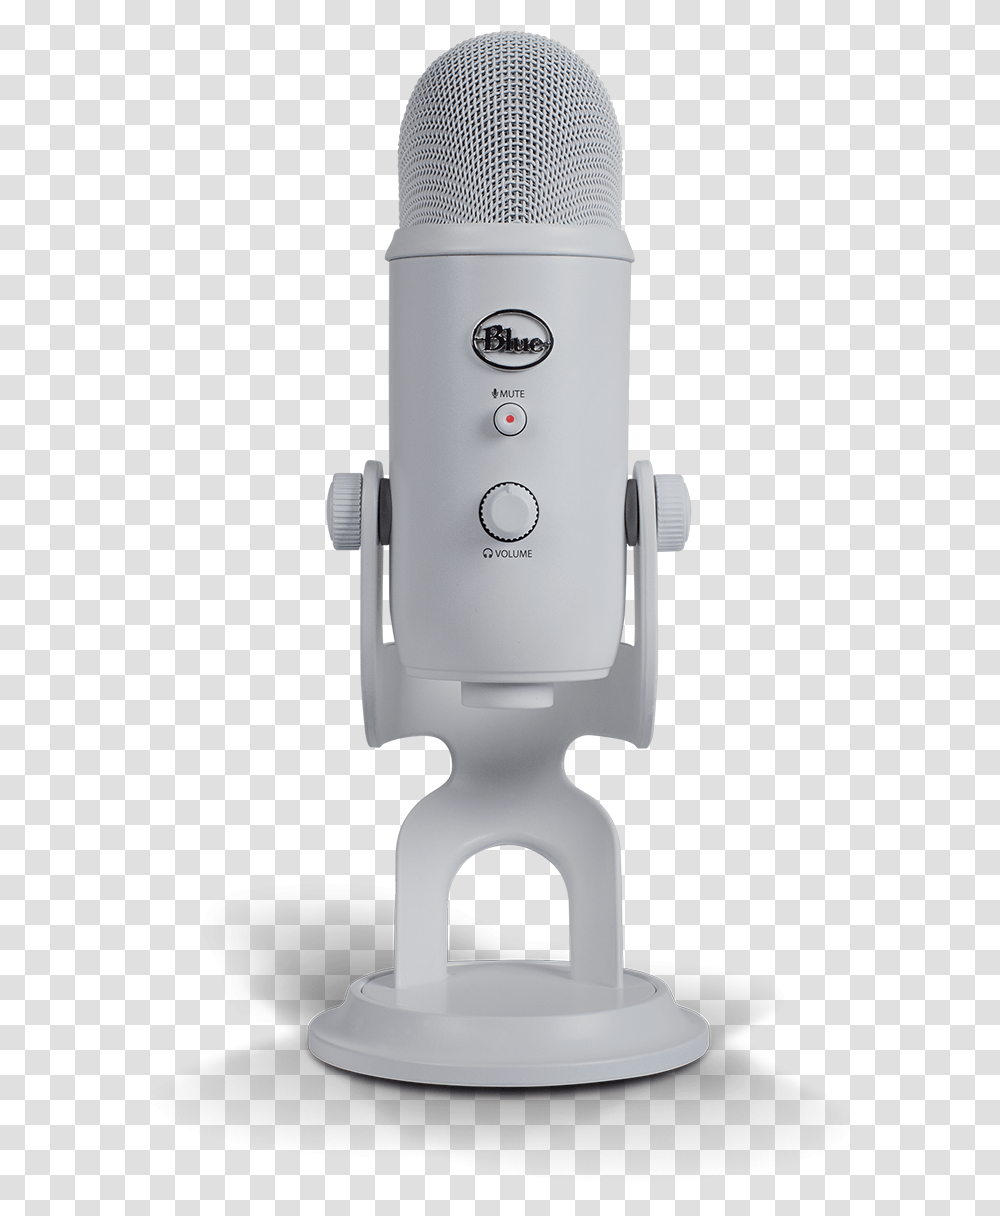 Blue Microphone Yeti, Chair, Furniture, Robot, Microscope Transparent Png